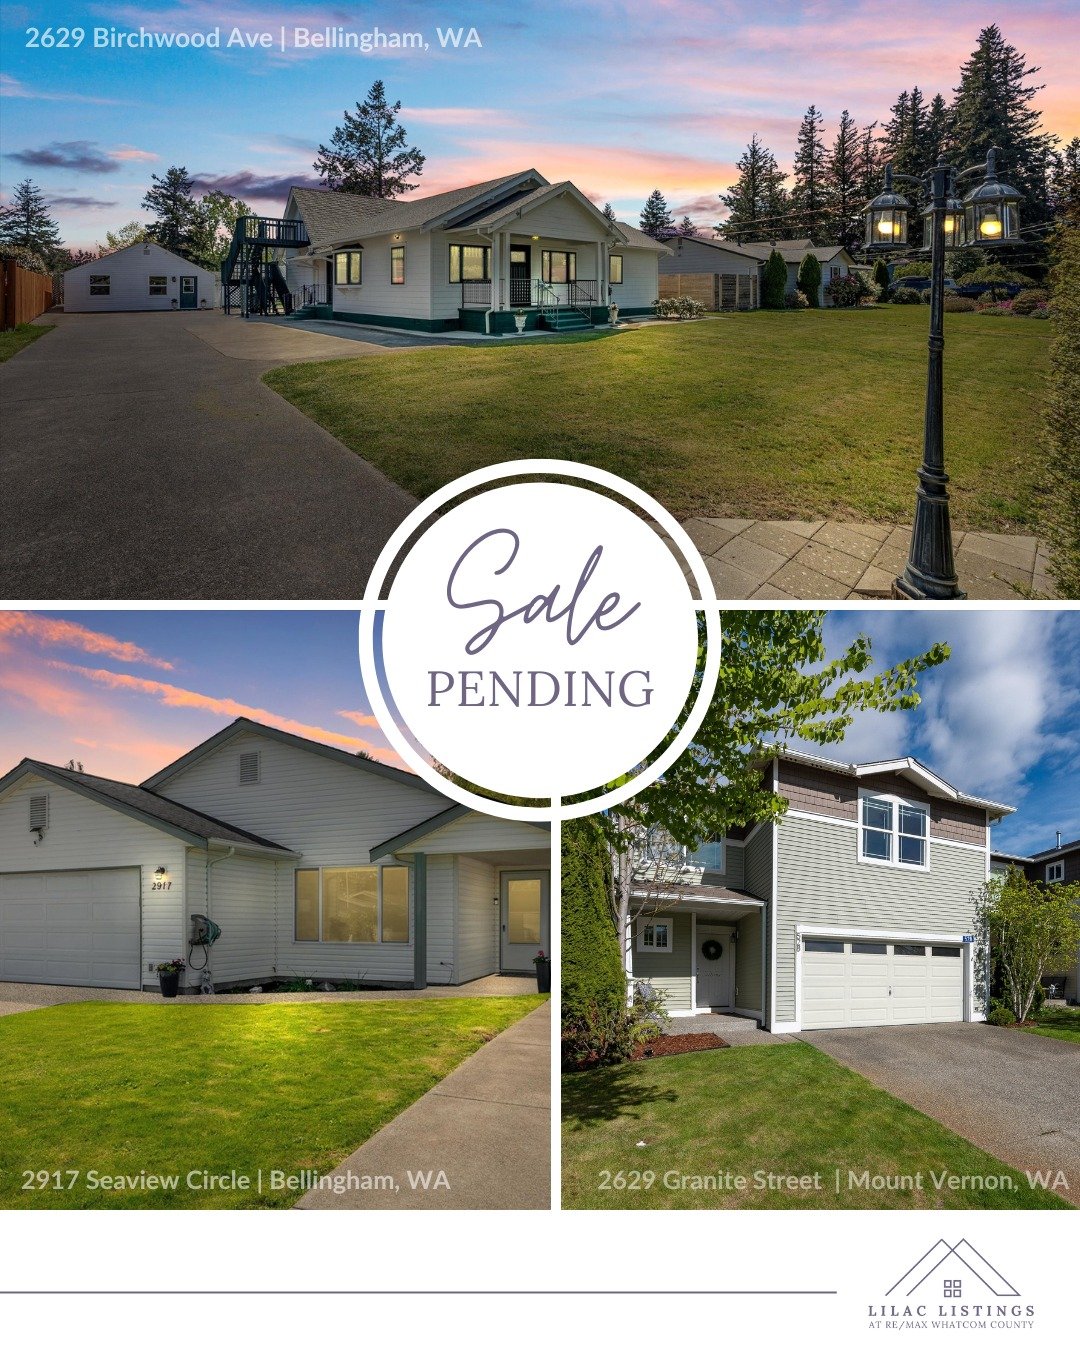 It's May Madness here at Lilac Listings! 💥🤪

Our May client listings have been generating serious buzz, and we're thrilled to see the quick and impressive results they're achieving!

All three of our May listings attracted multiple offers within da